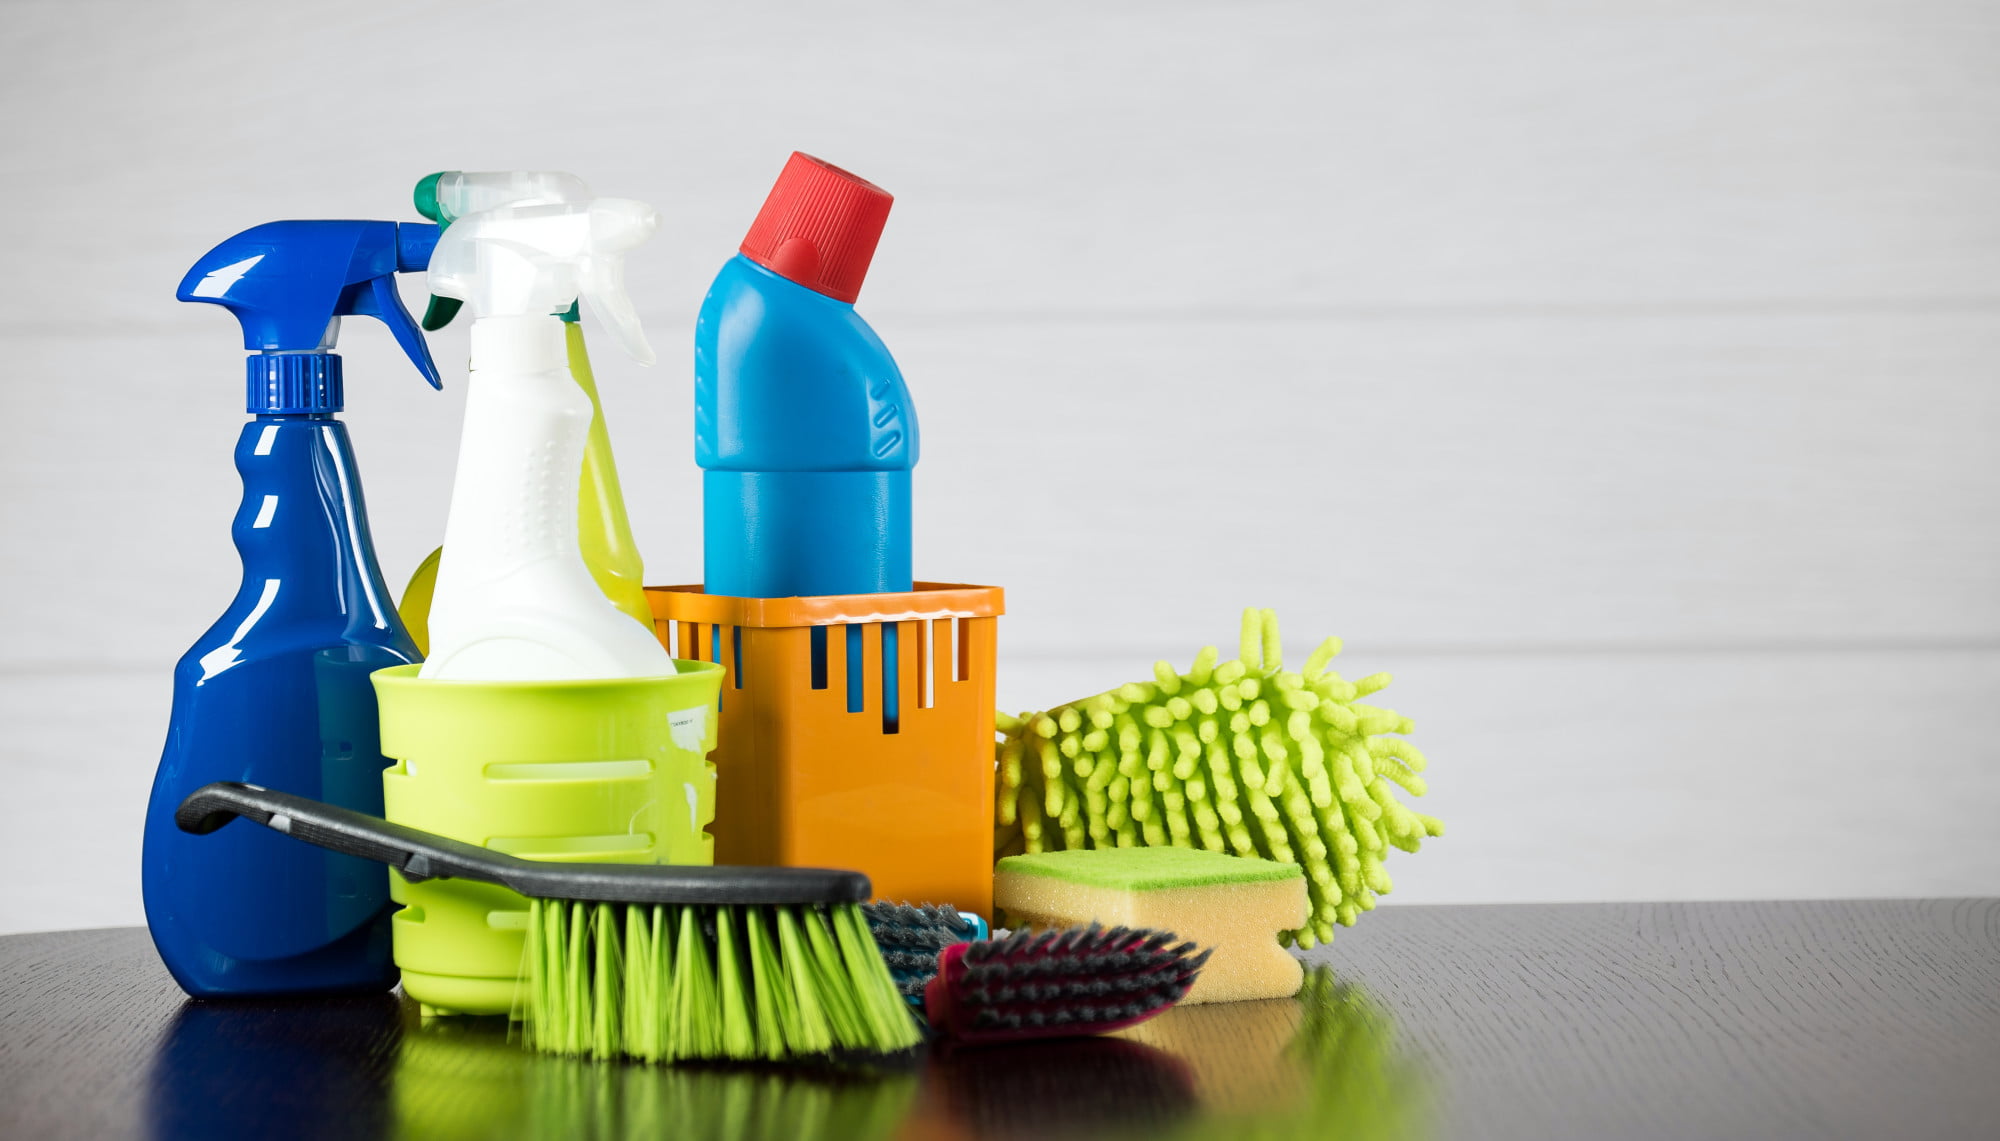 Having the best home cleaning products ensures your family is safe from harmful chemicals, and that your floors and surfaces are protected.